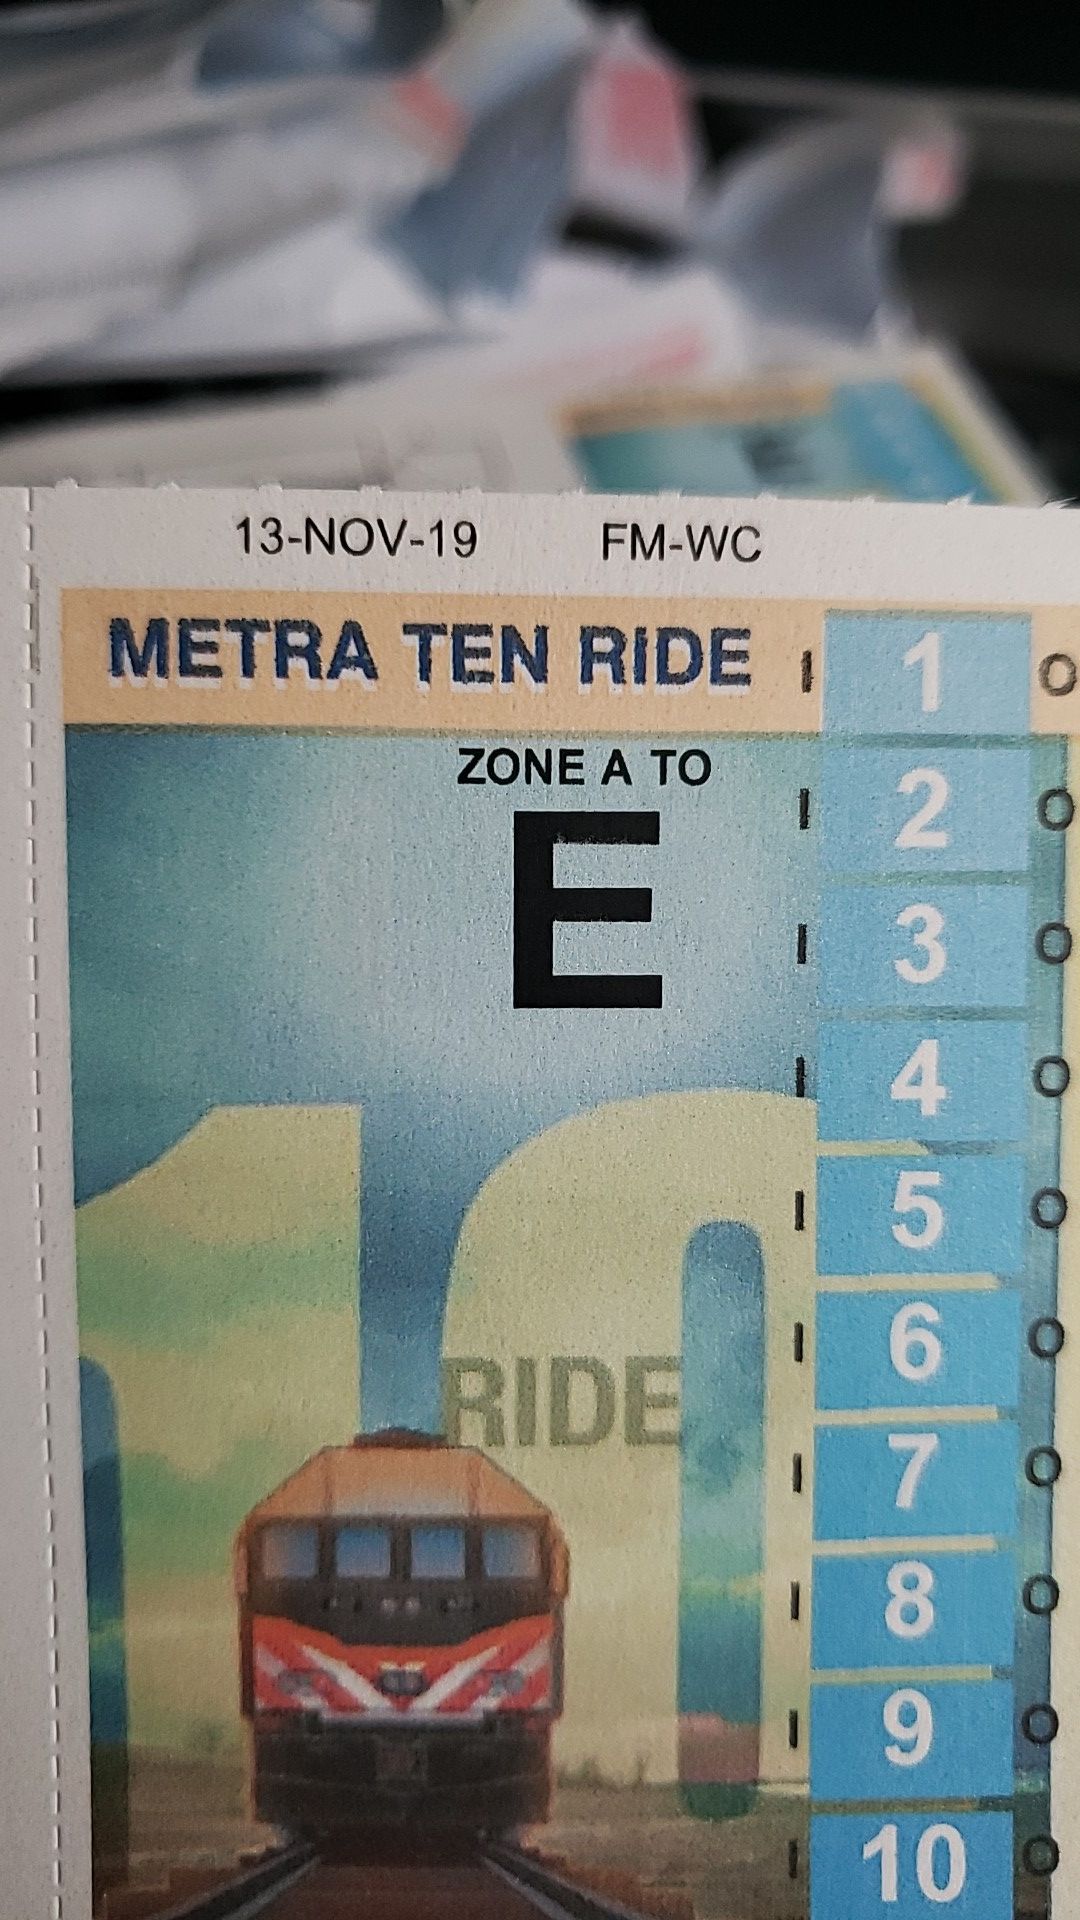 Metra 10 ride ticket available...I can give for lesser price